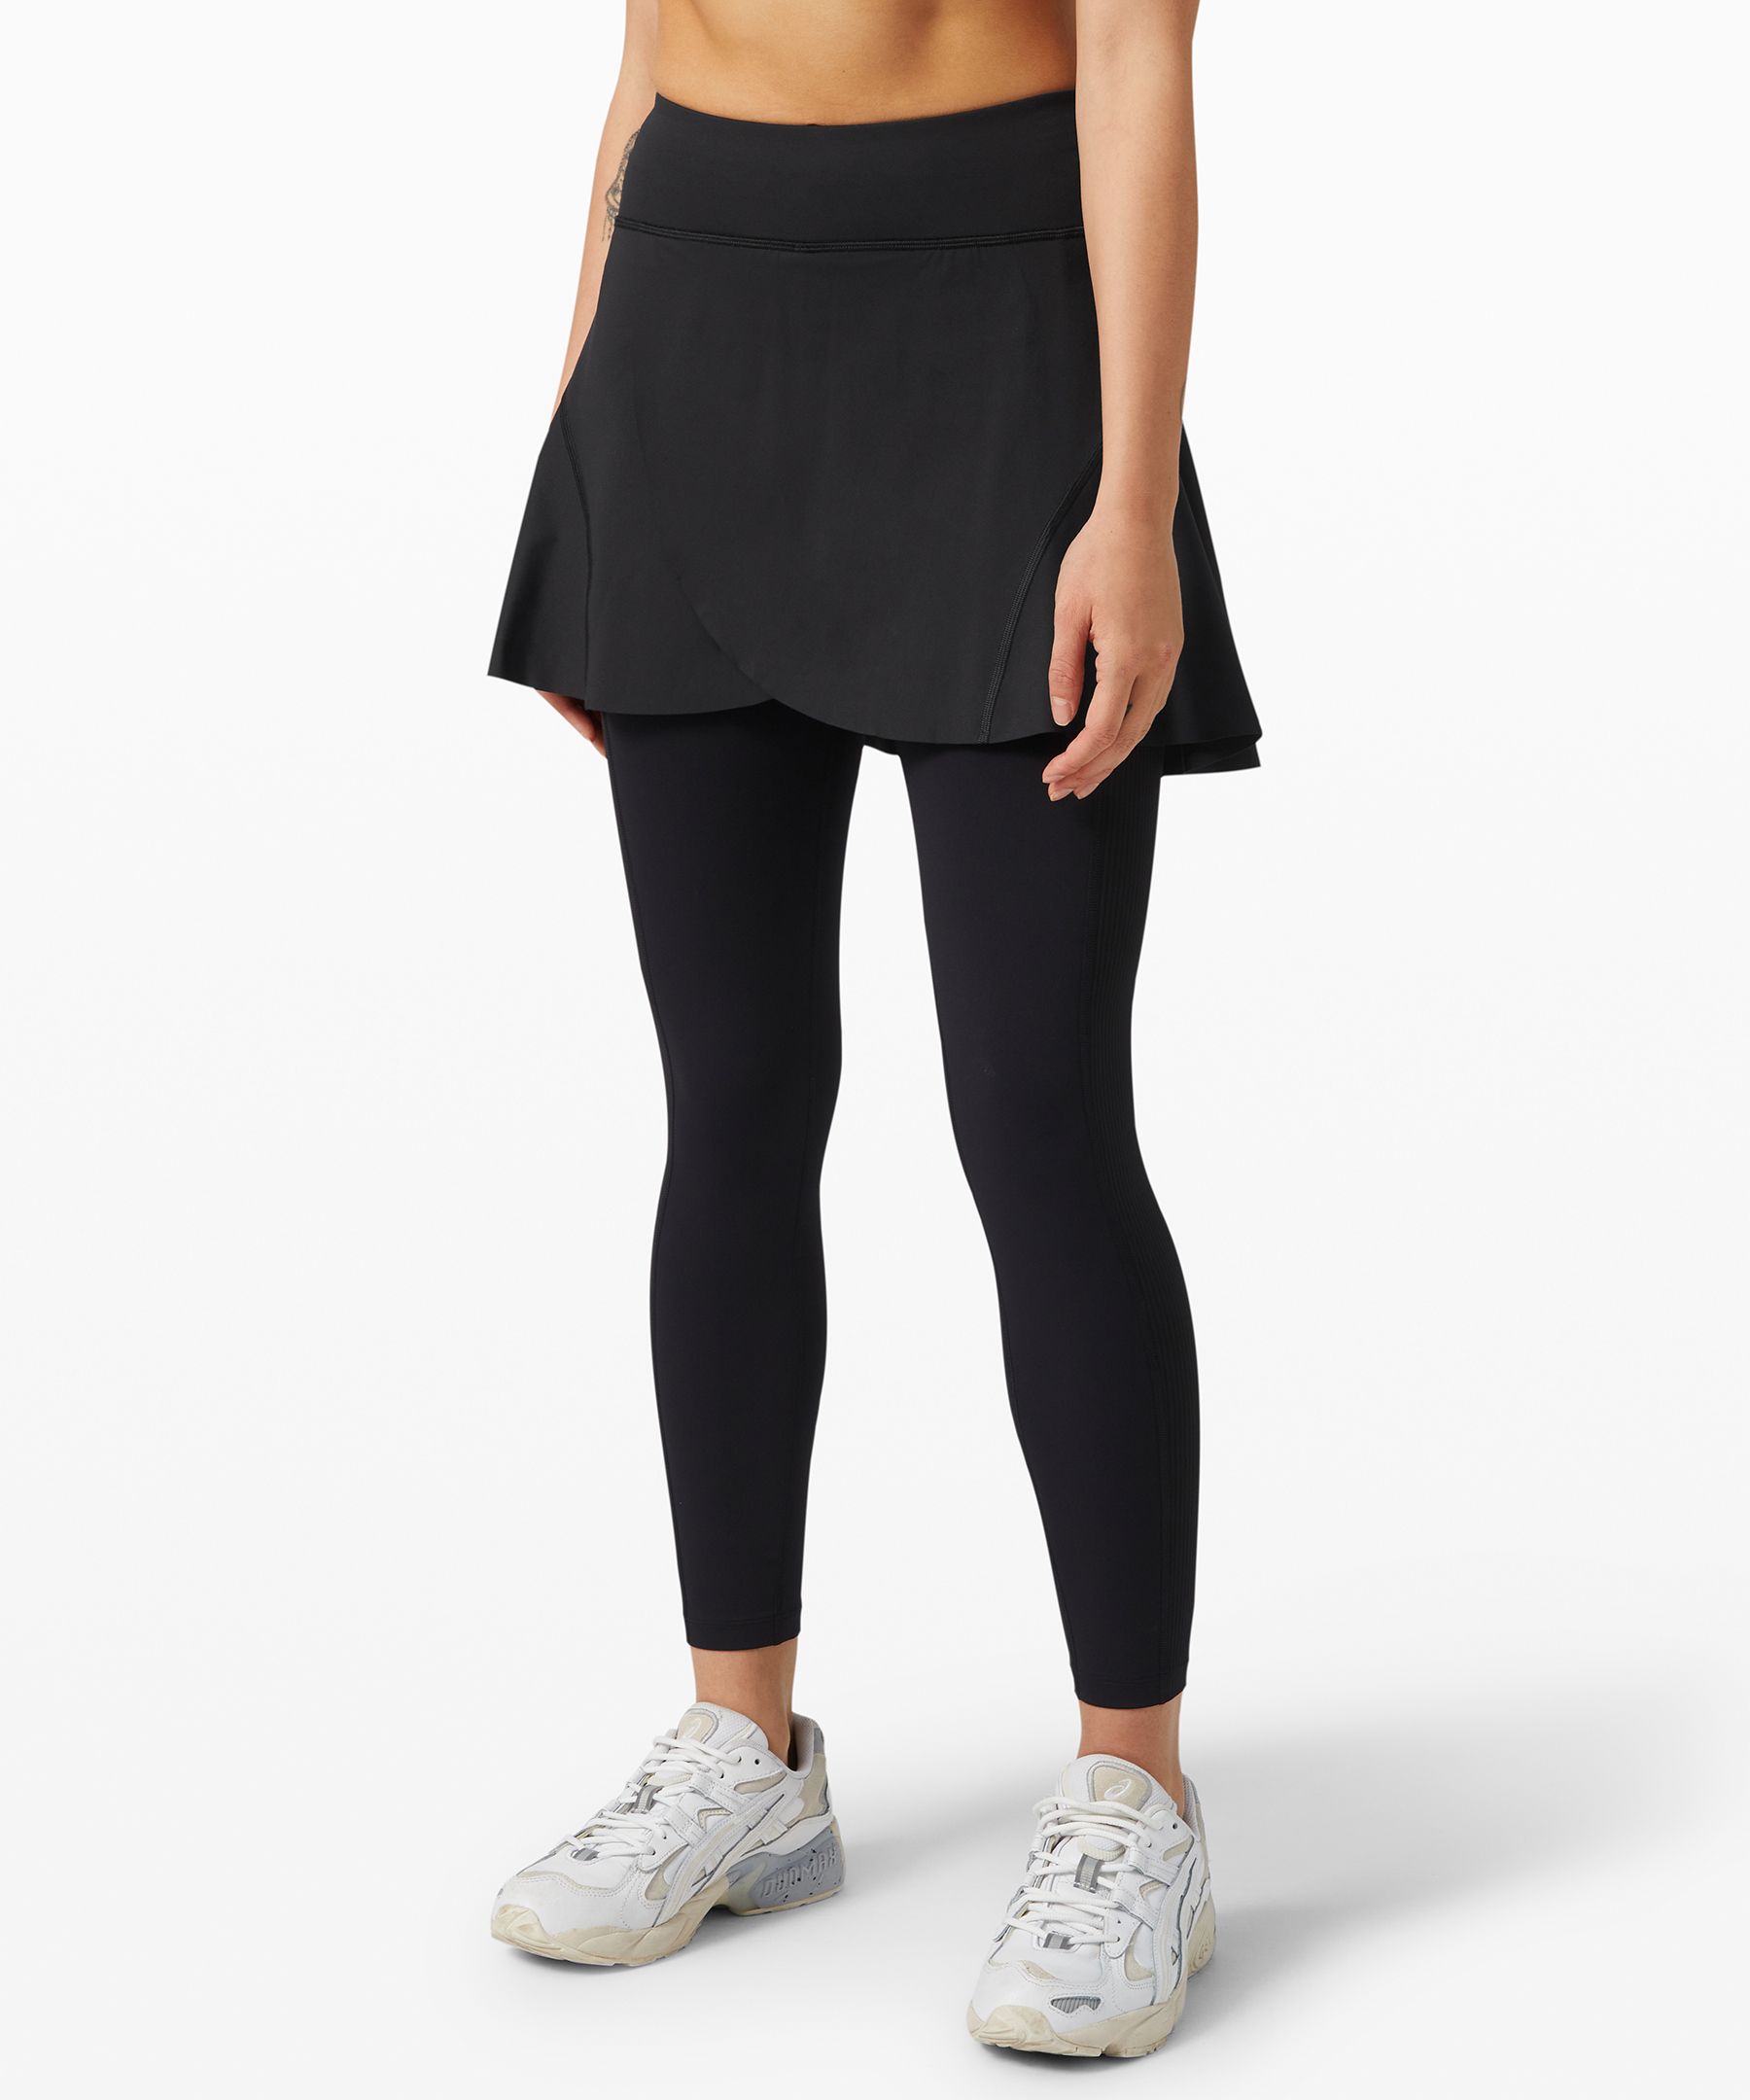 Skirt Sports 'Toasty Tights' - Runners Boutique